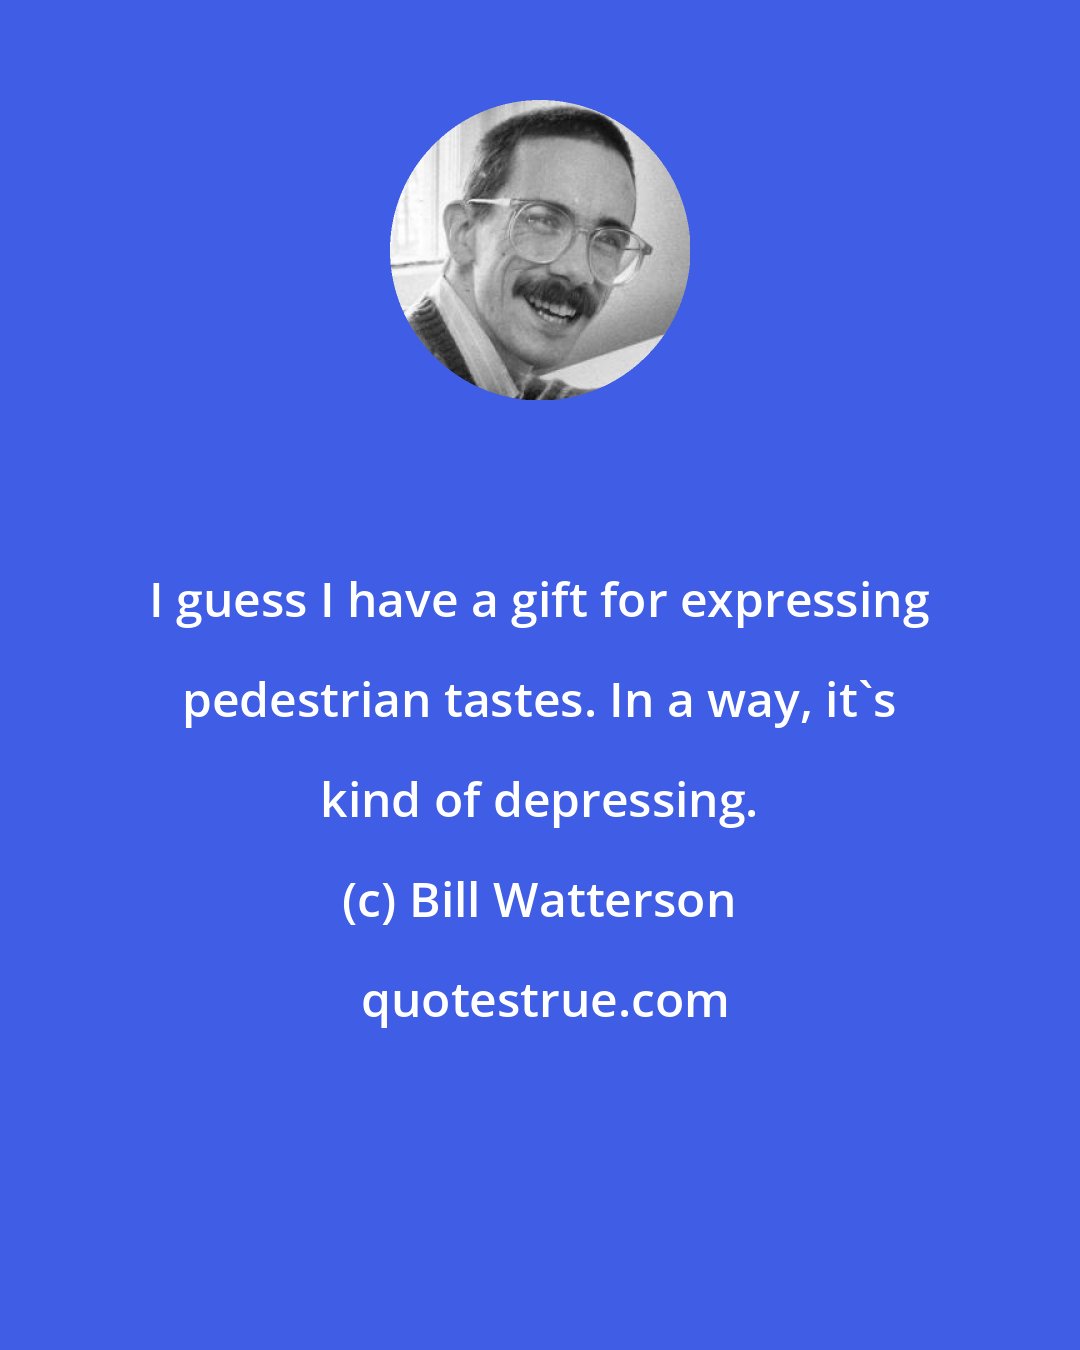 Bill Watterson: I guess I have a gift for expressing pedestrian tastes. In a way, it's kind of depressing.